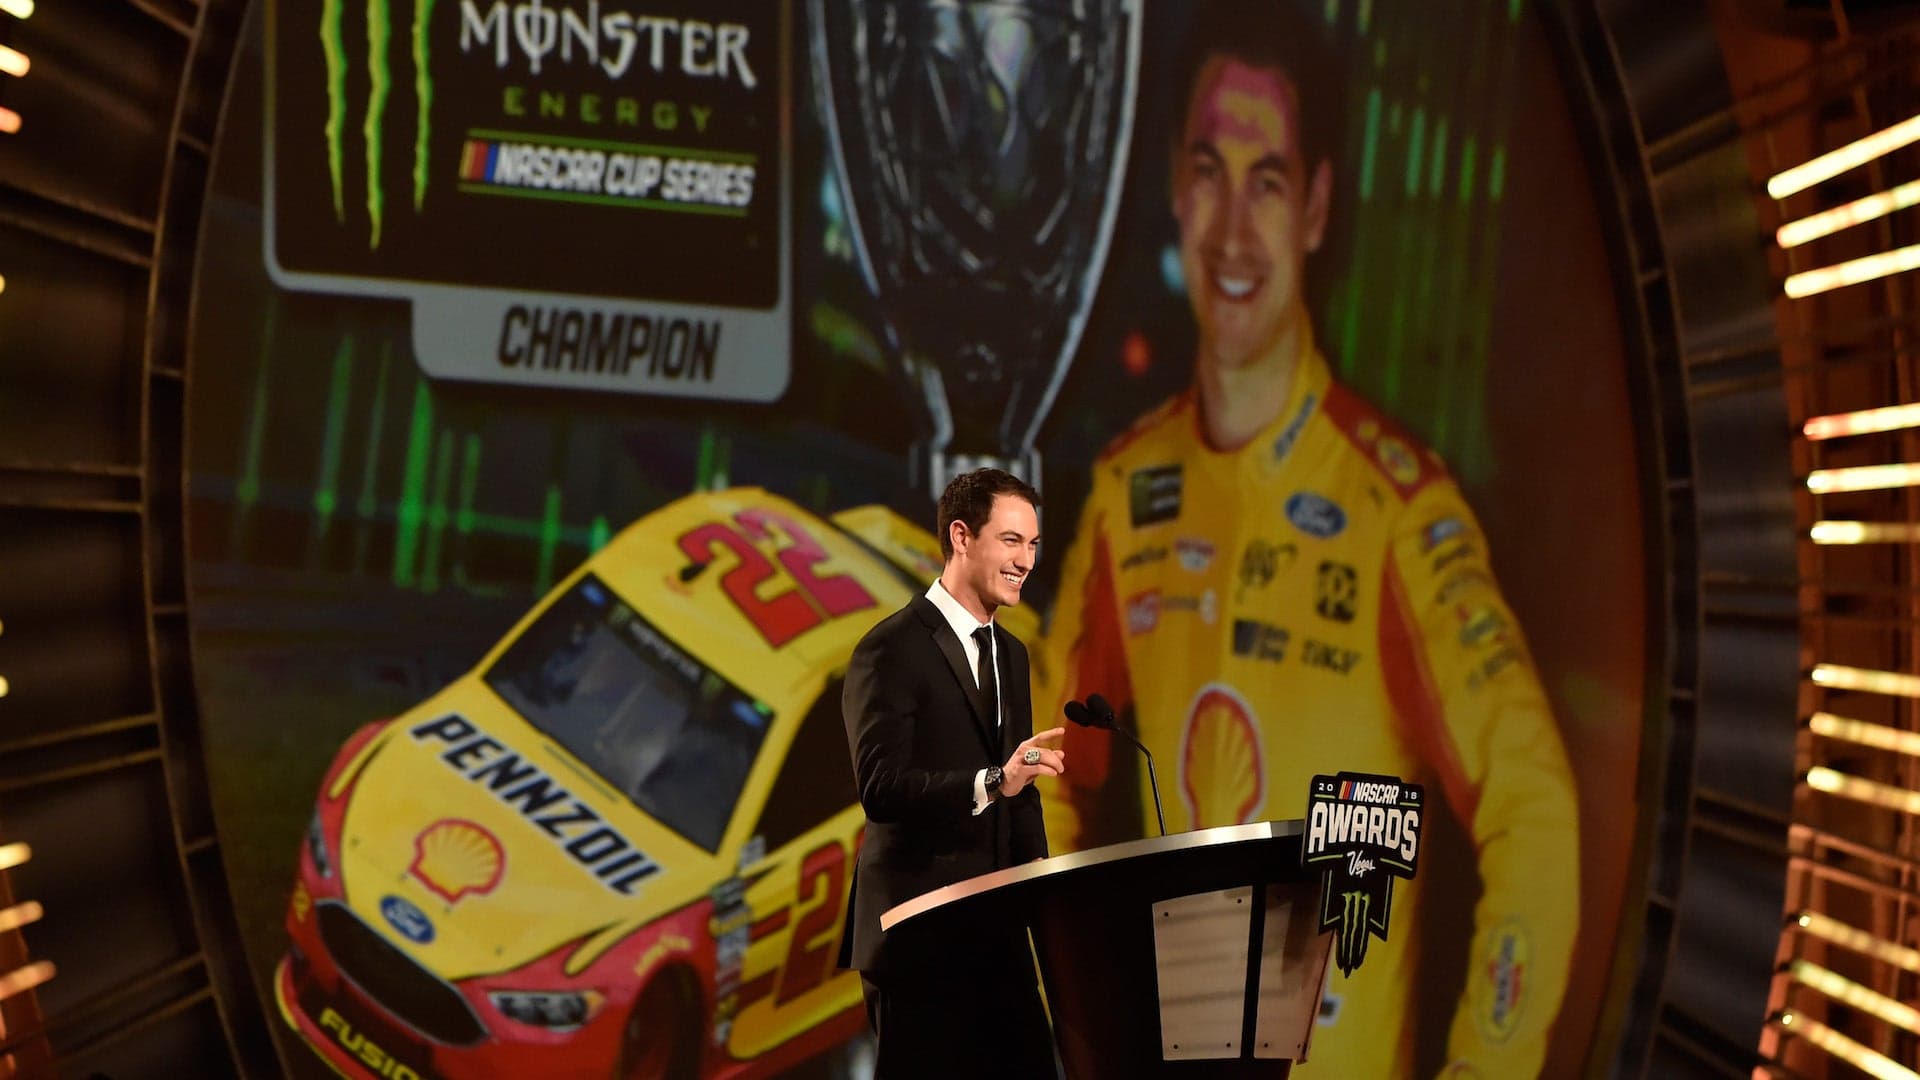 NASCAR’s Initial Return to Nashville May Not Happen on the Track